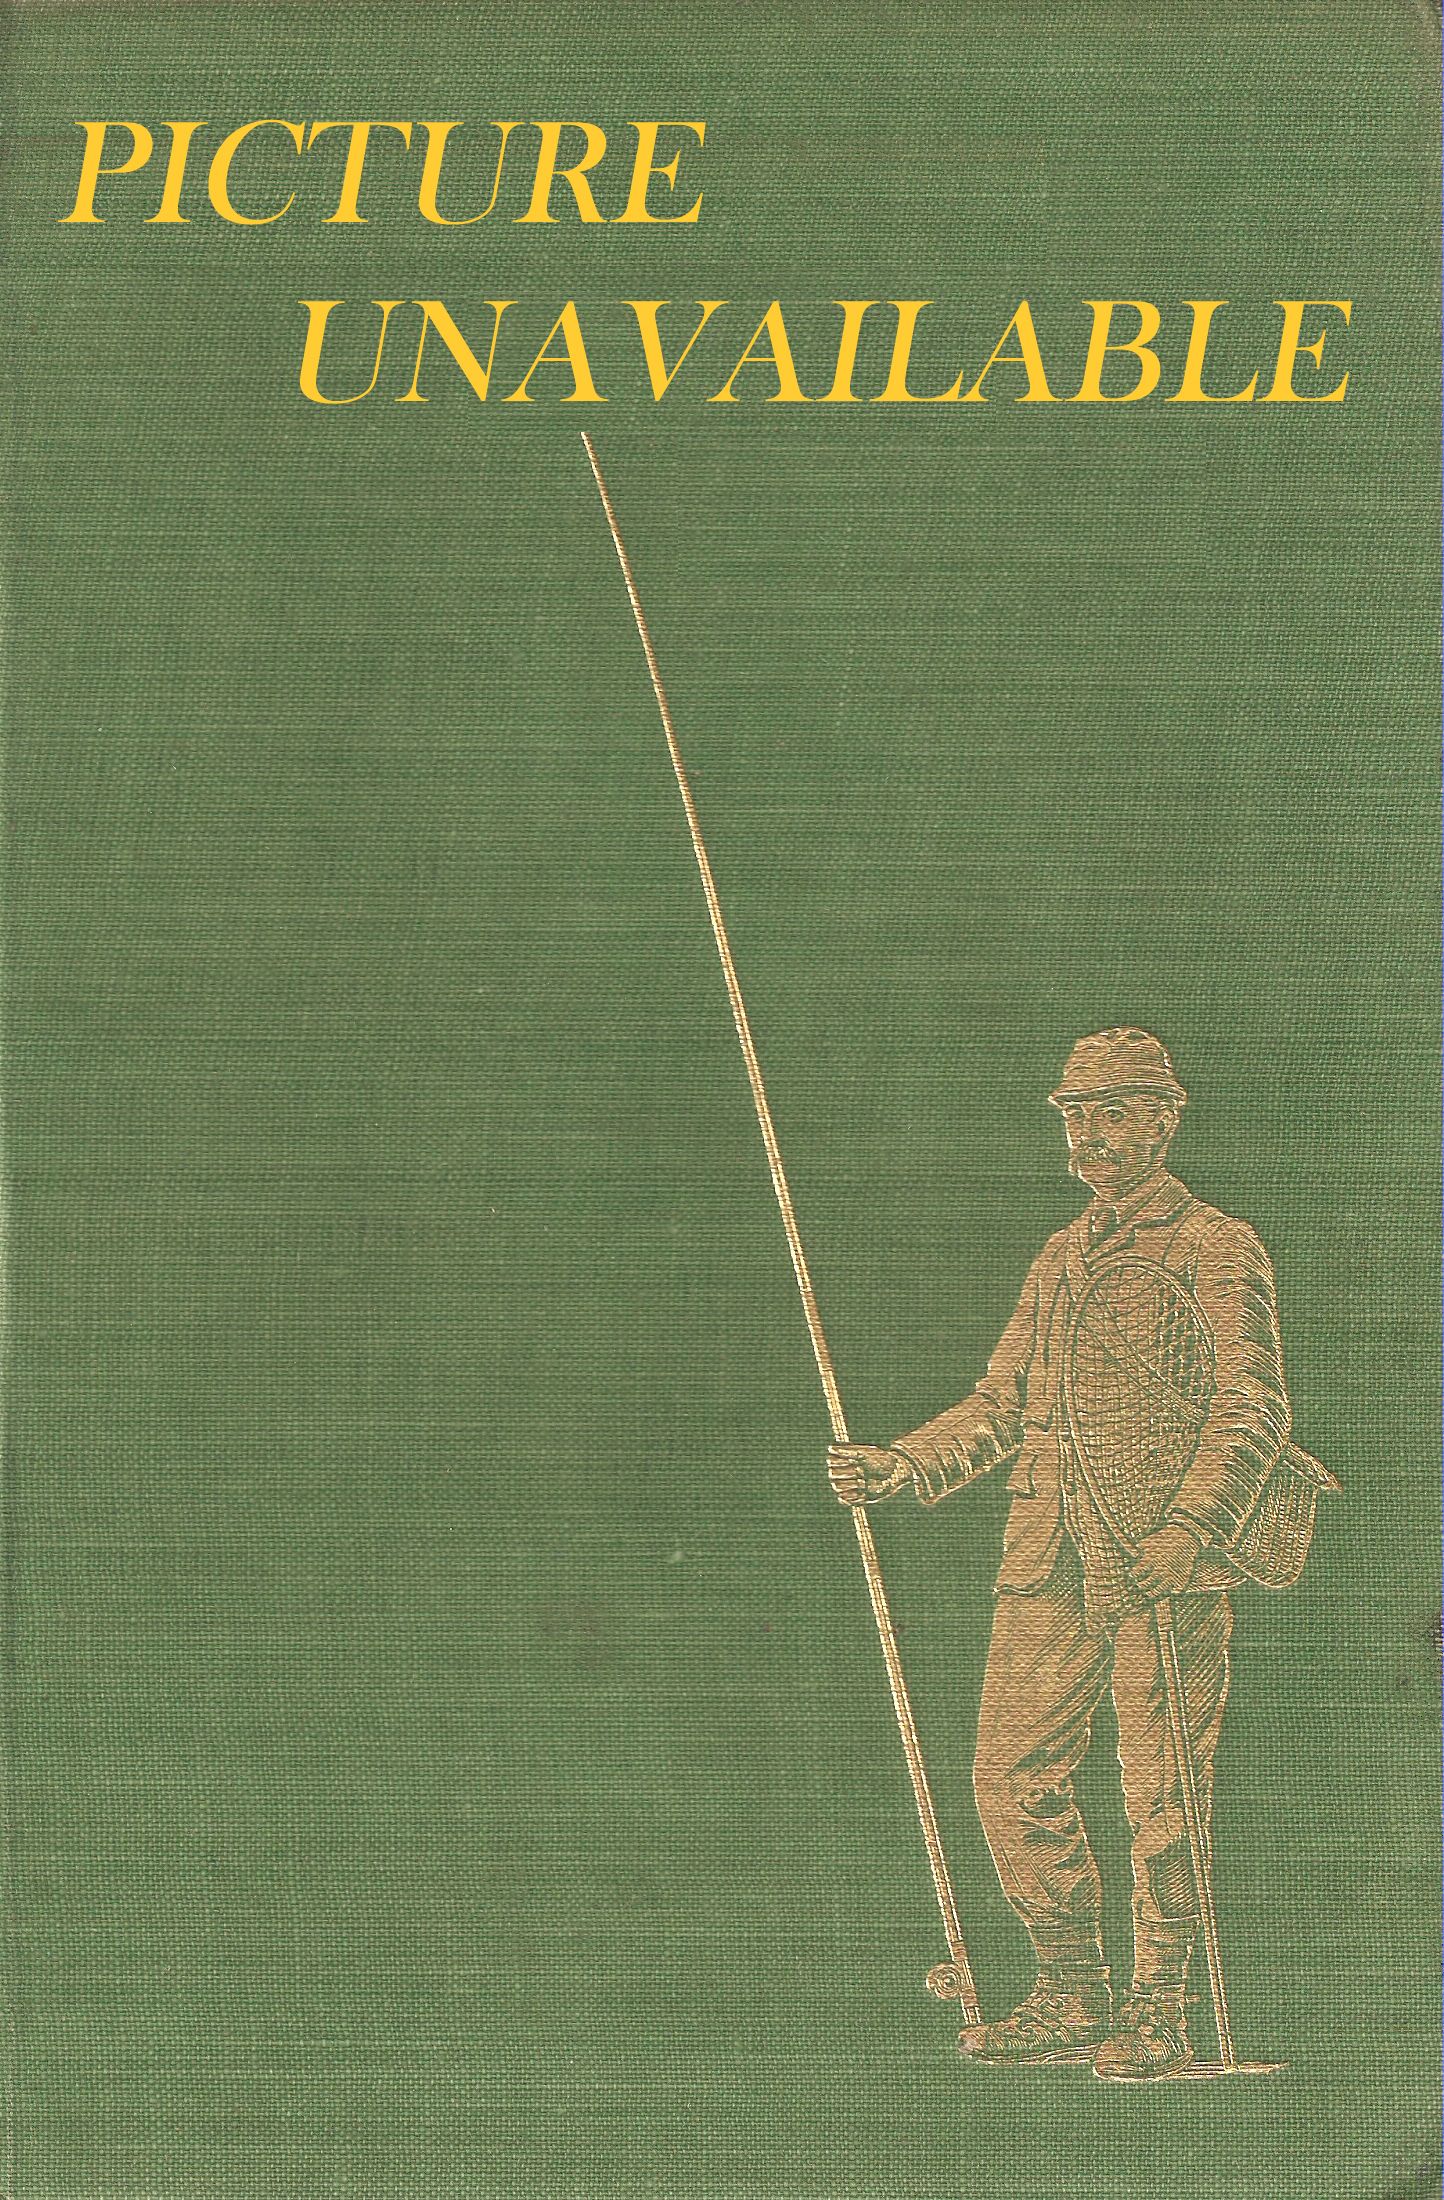 ANGLING IN EARNEST. By Fred Taylor. First edition.